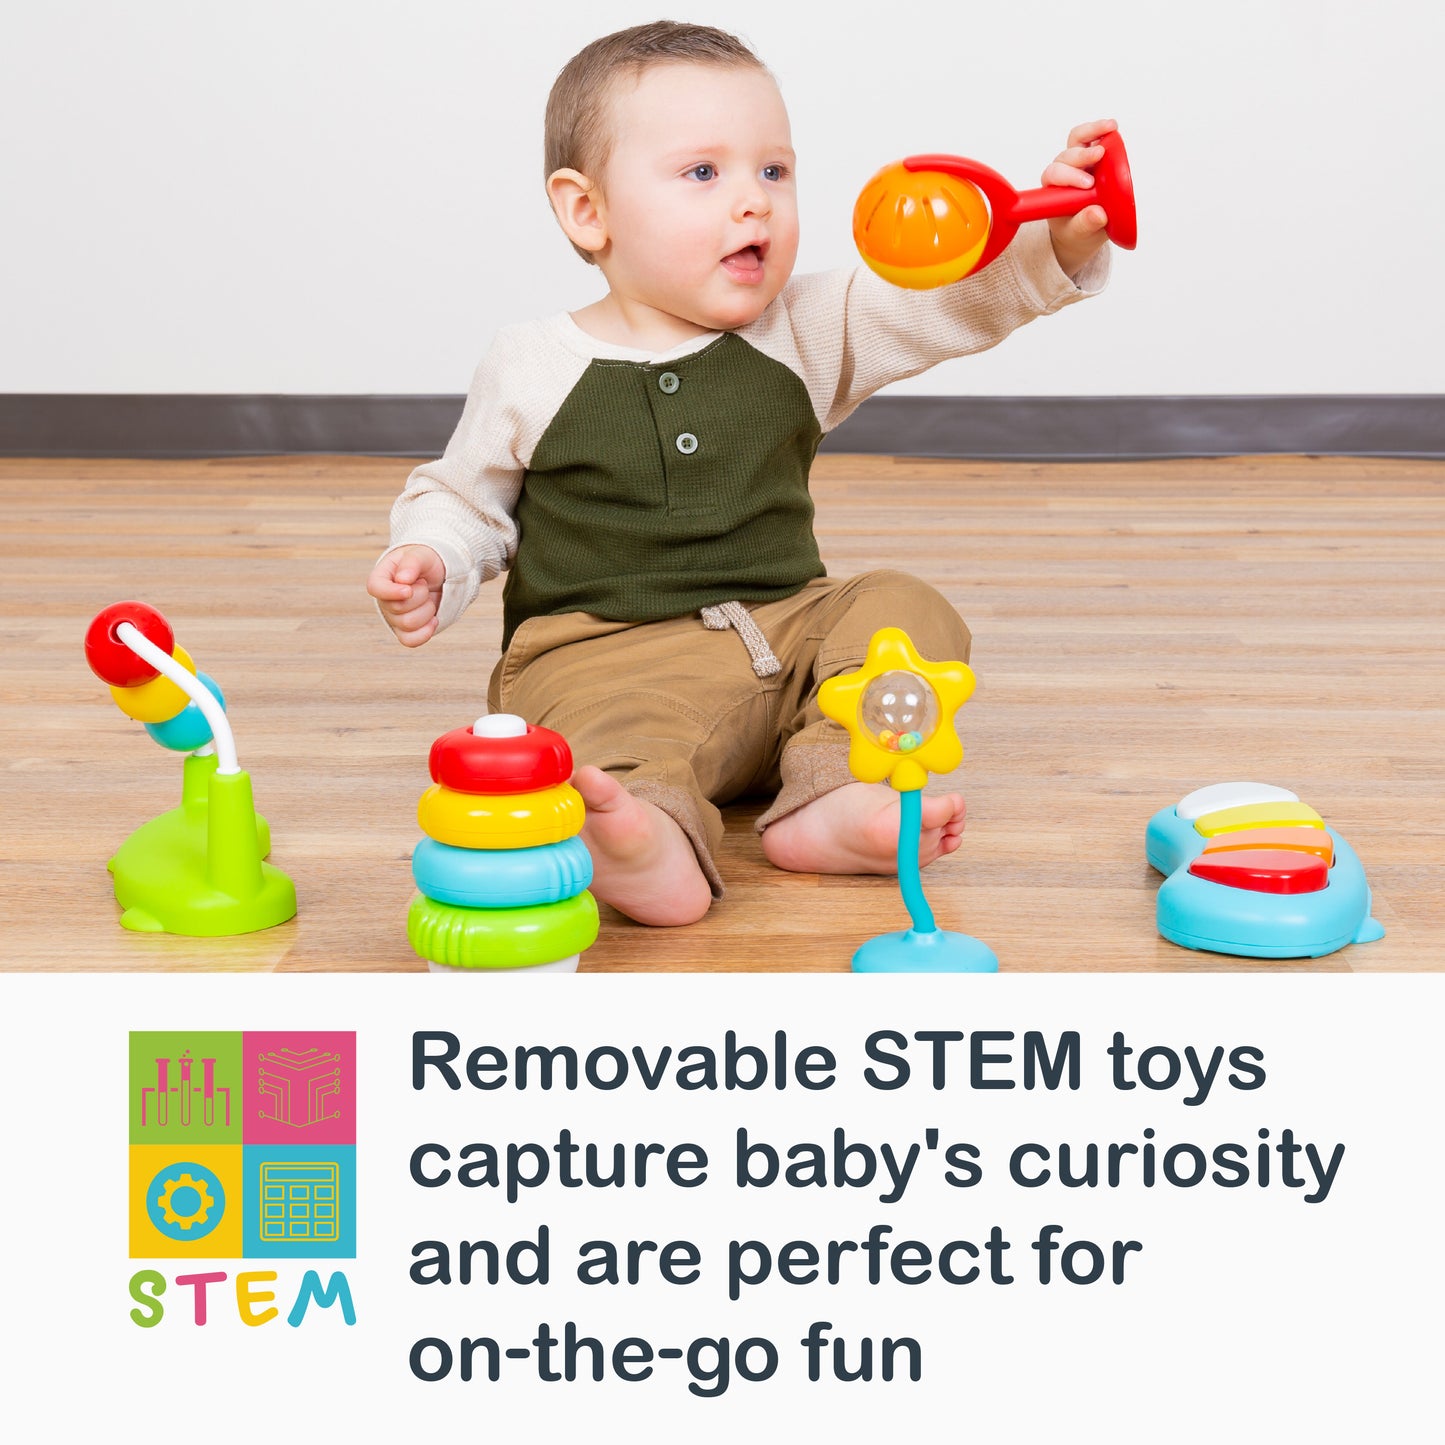 Removable STEM toys capture baby's curiosity and are perfect for on the go fun